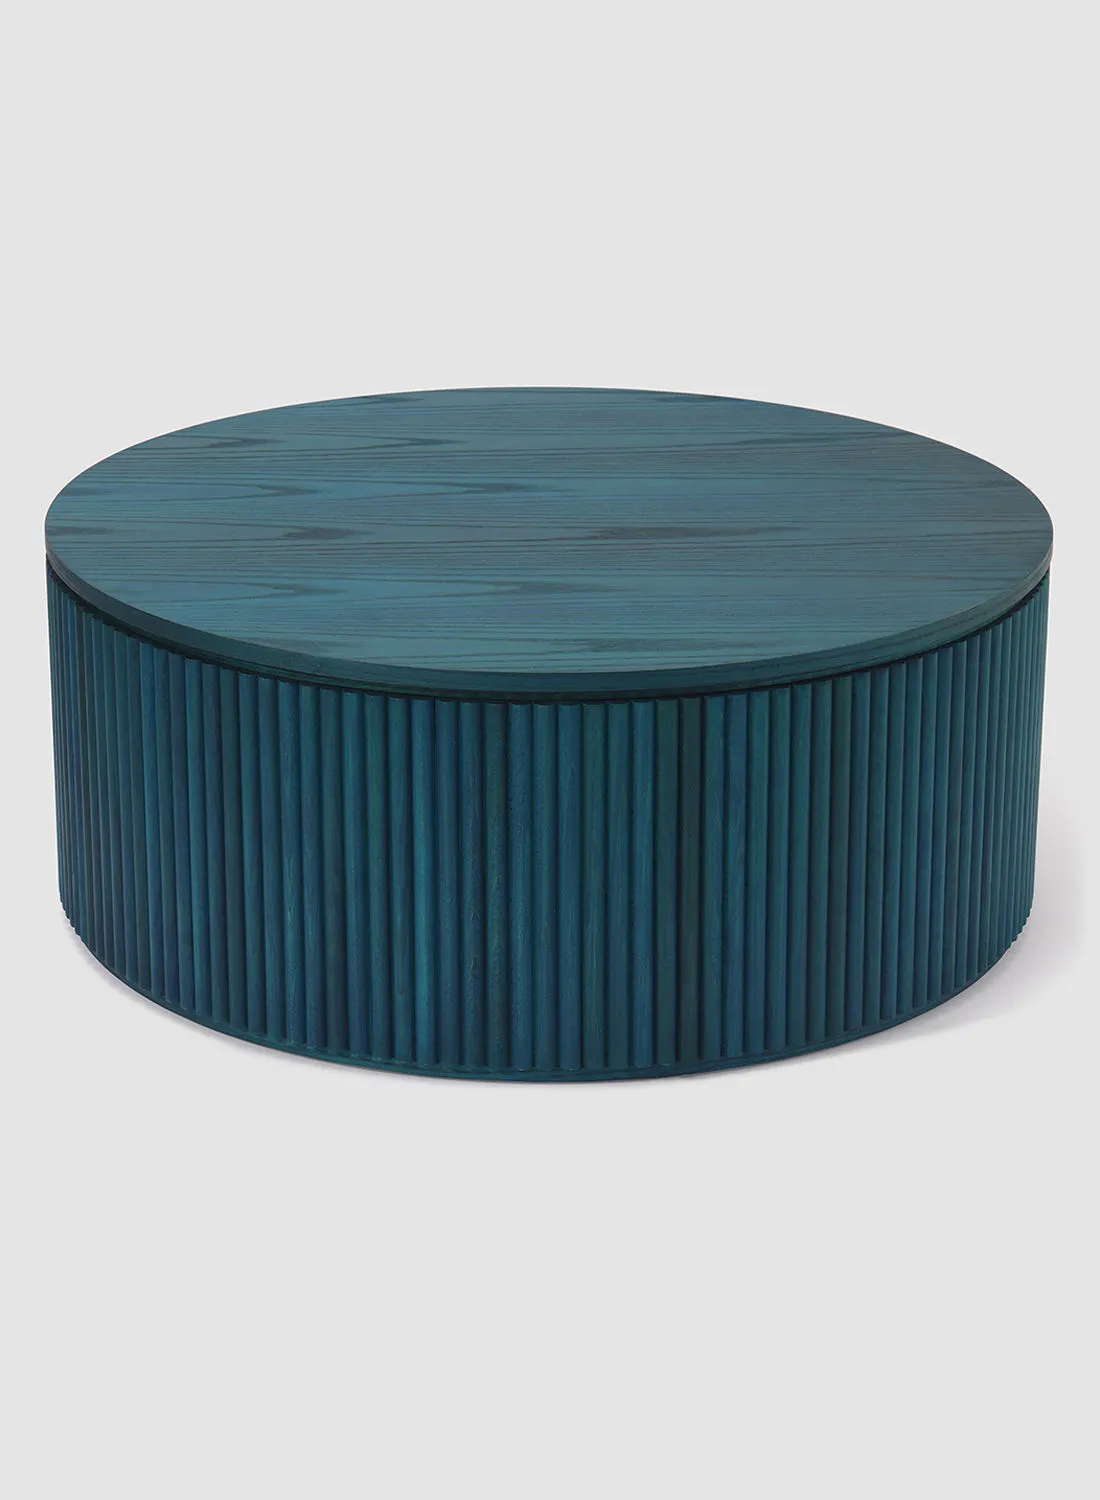 ebb & flow Coffee Table Luxurious -Used As Coffee Corner In Blue Wood - Size 58 X 58 X 42